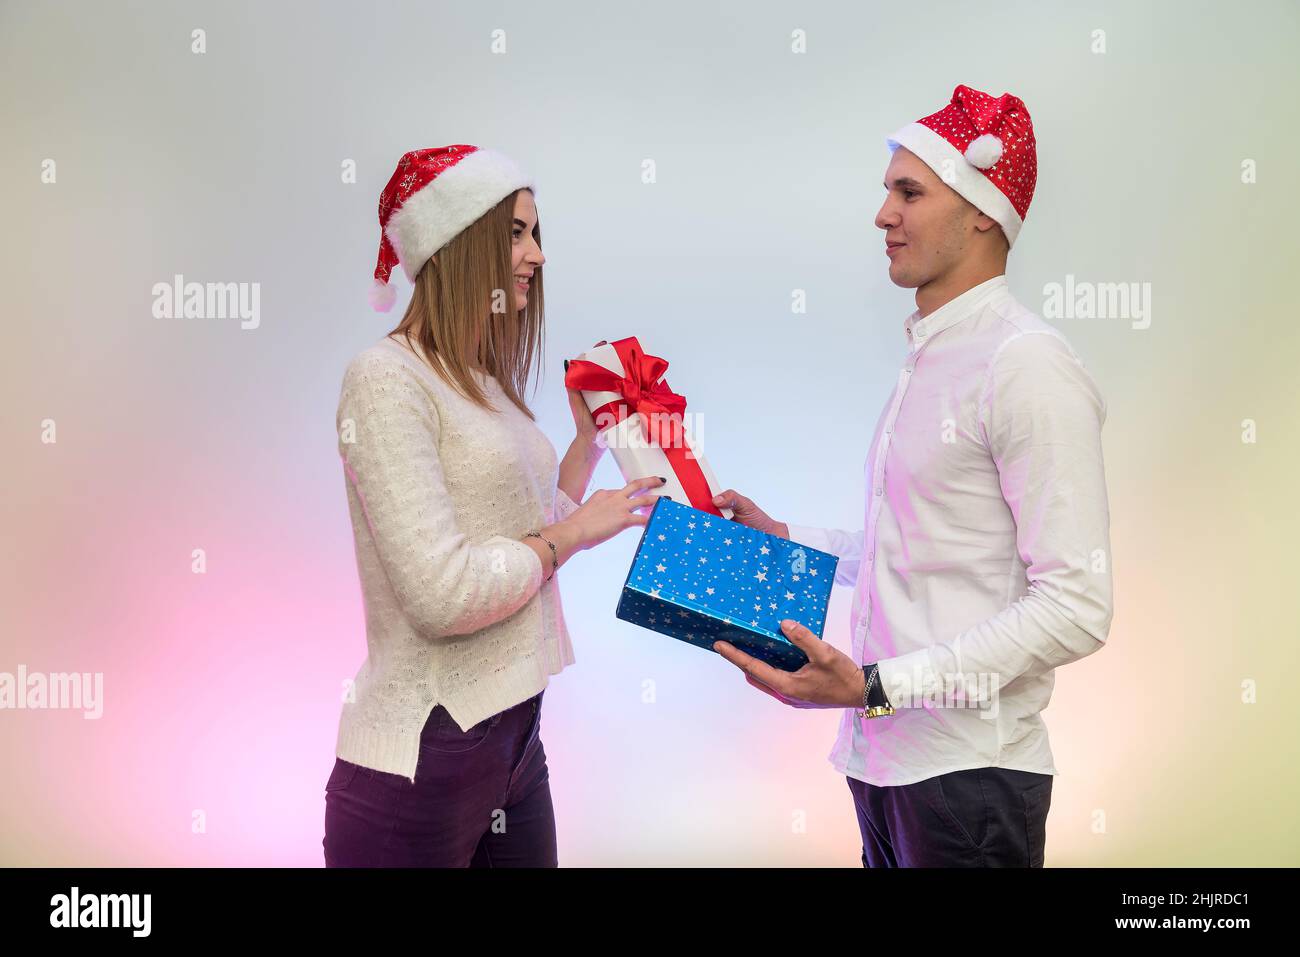 Young, fashion couple celebrating St. Valentine's Day giving presents to each other Stock Photo